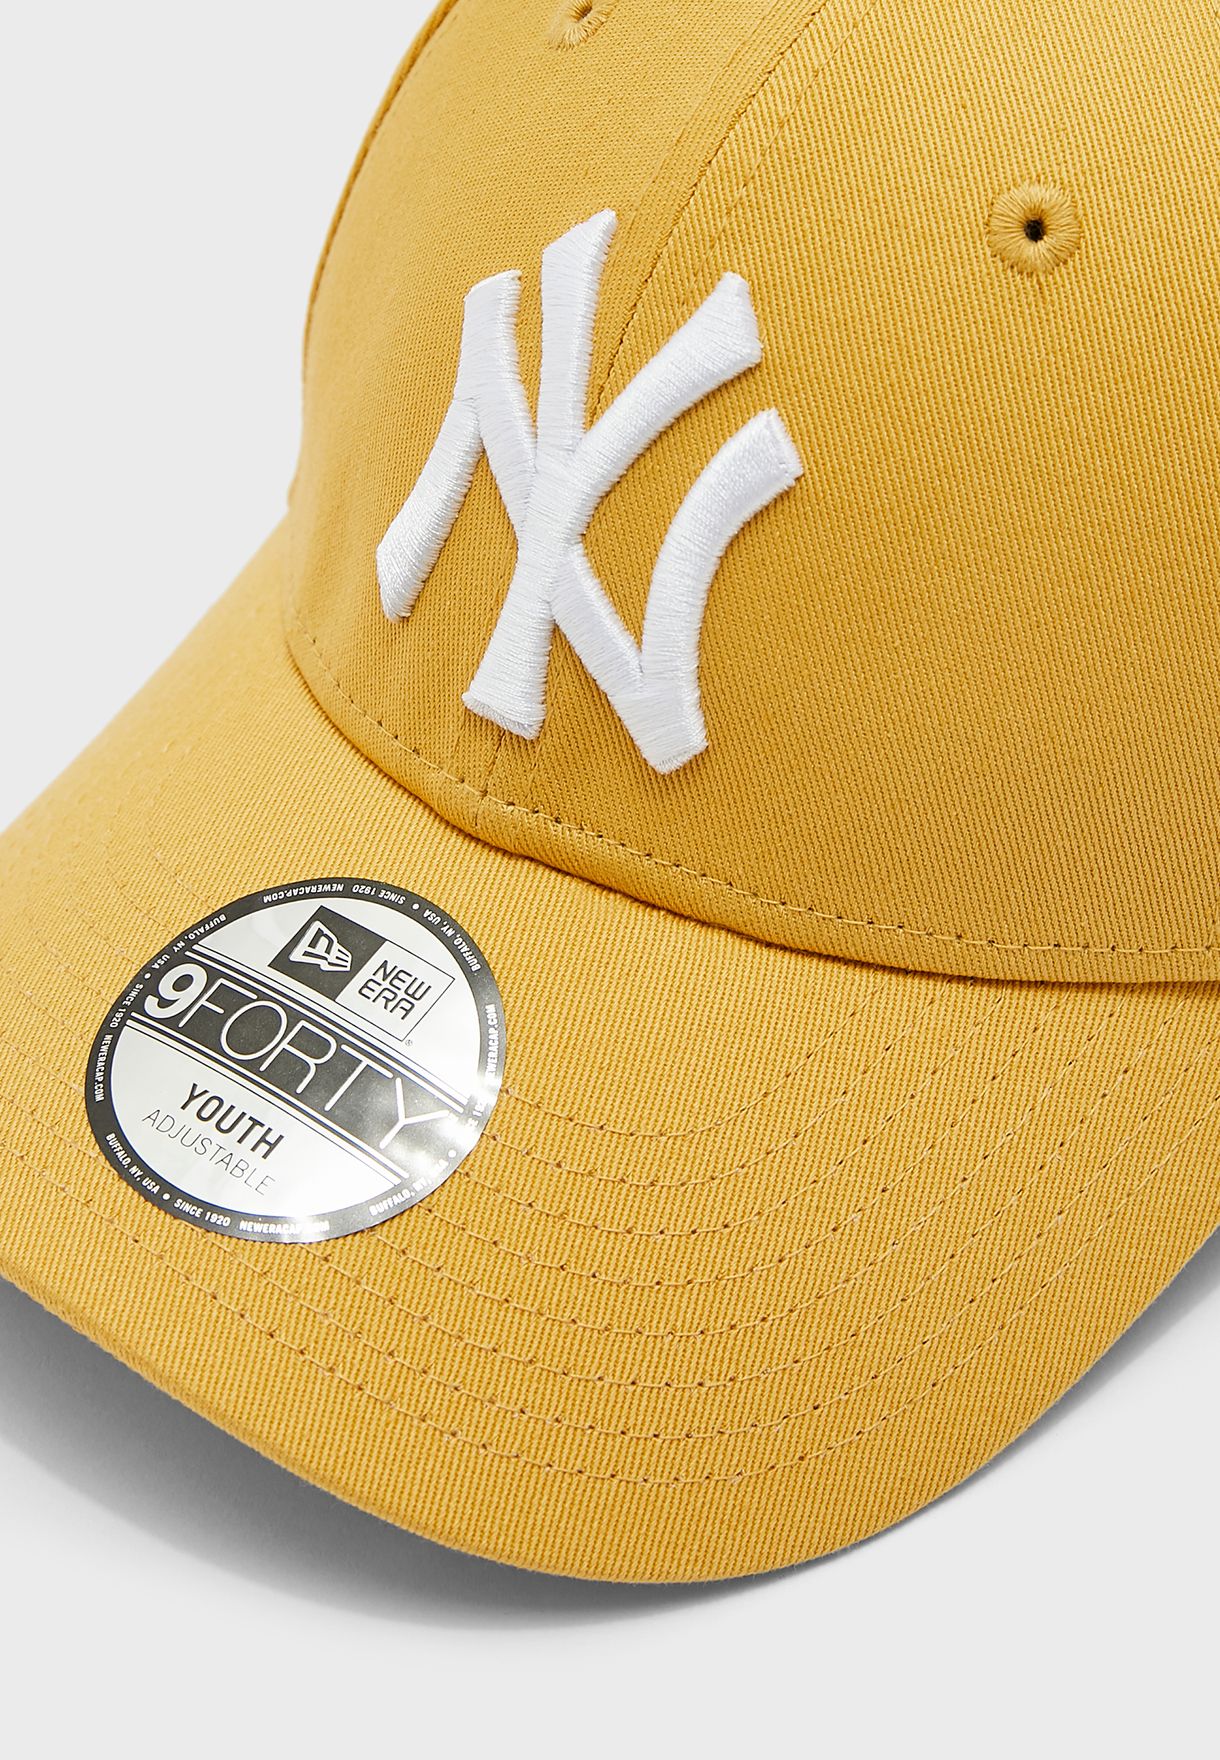 Youth 9Forty New York Yankees Essential League Cap